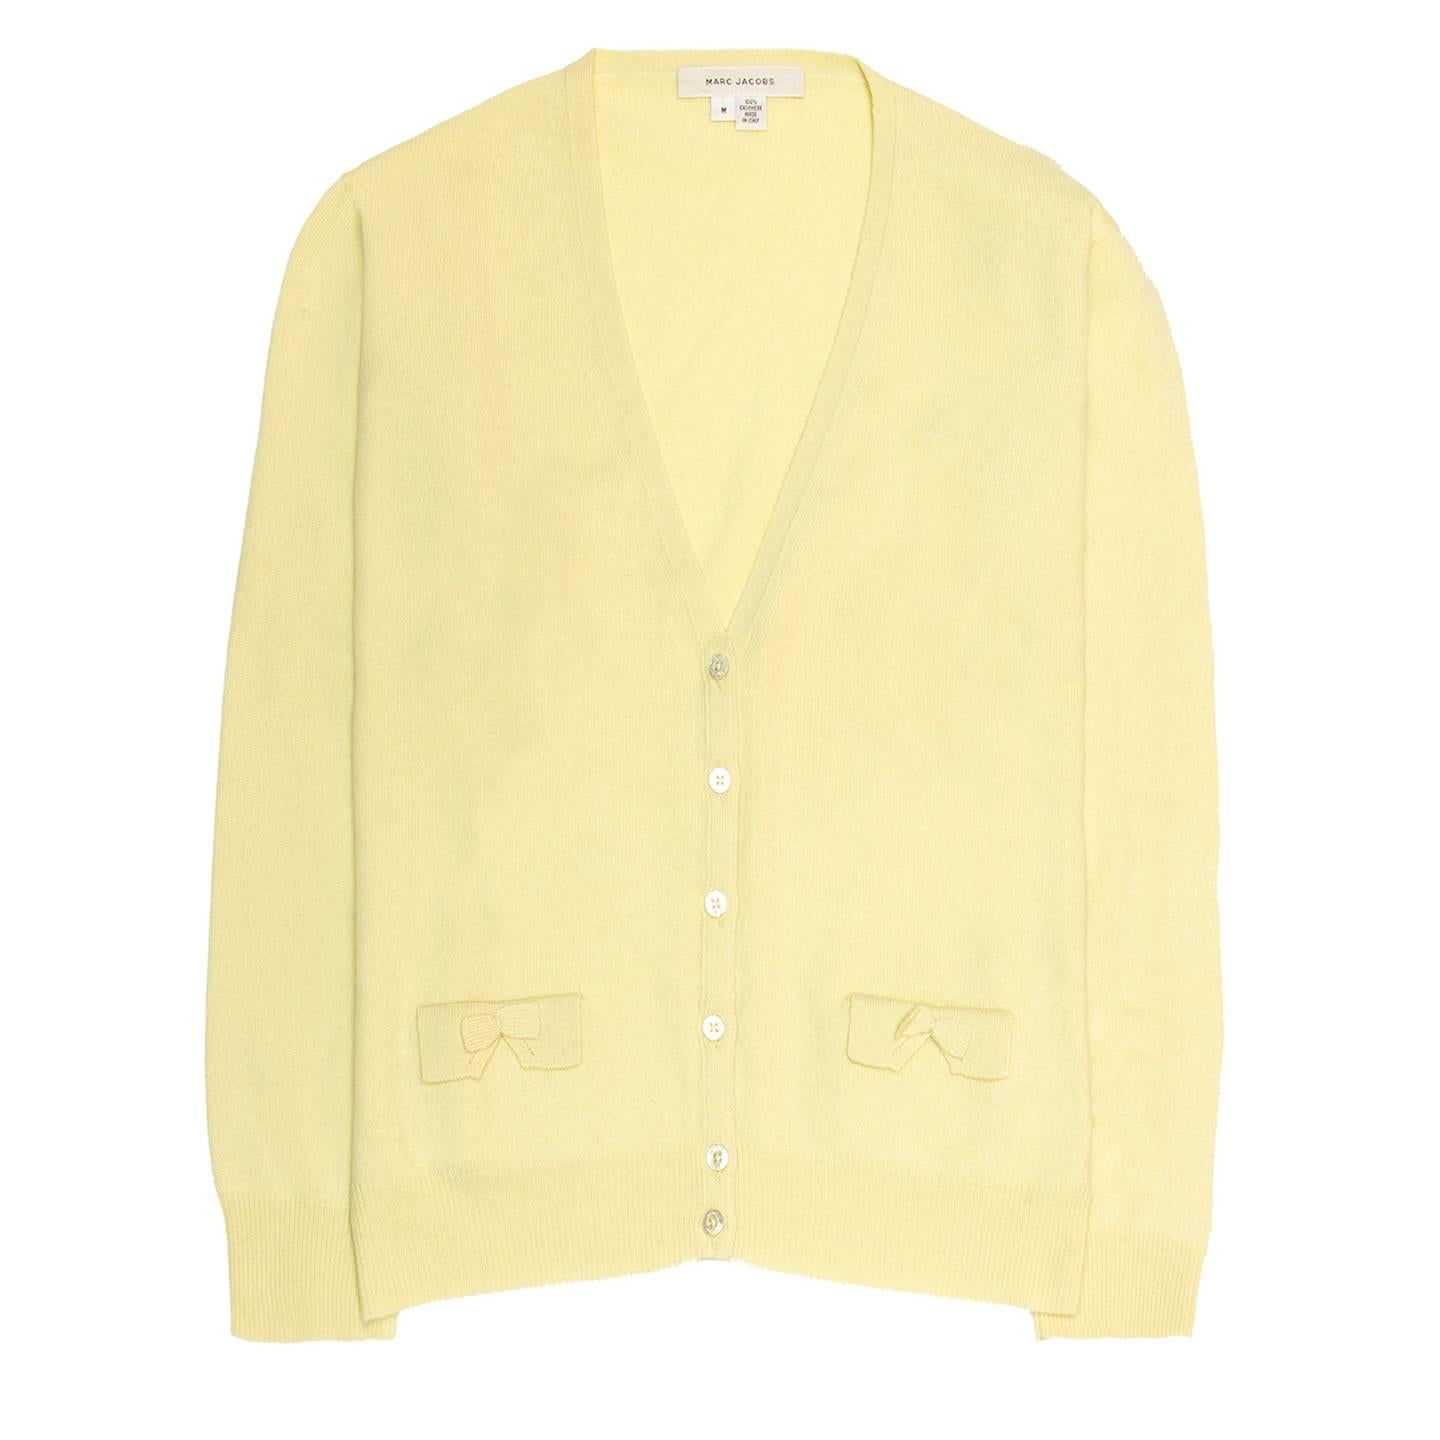 Pale yellow cashmere knit cardigan with V-neck, bows on the pockets and matching color buttons. Made in Italy.

Size  M Universal sizing

Condition  Excellent: worn a few times